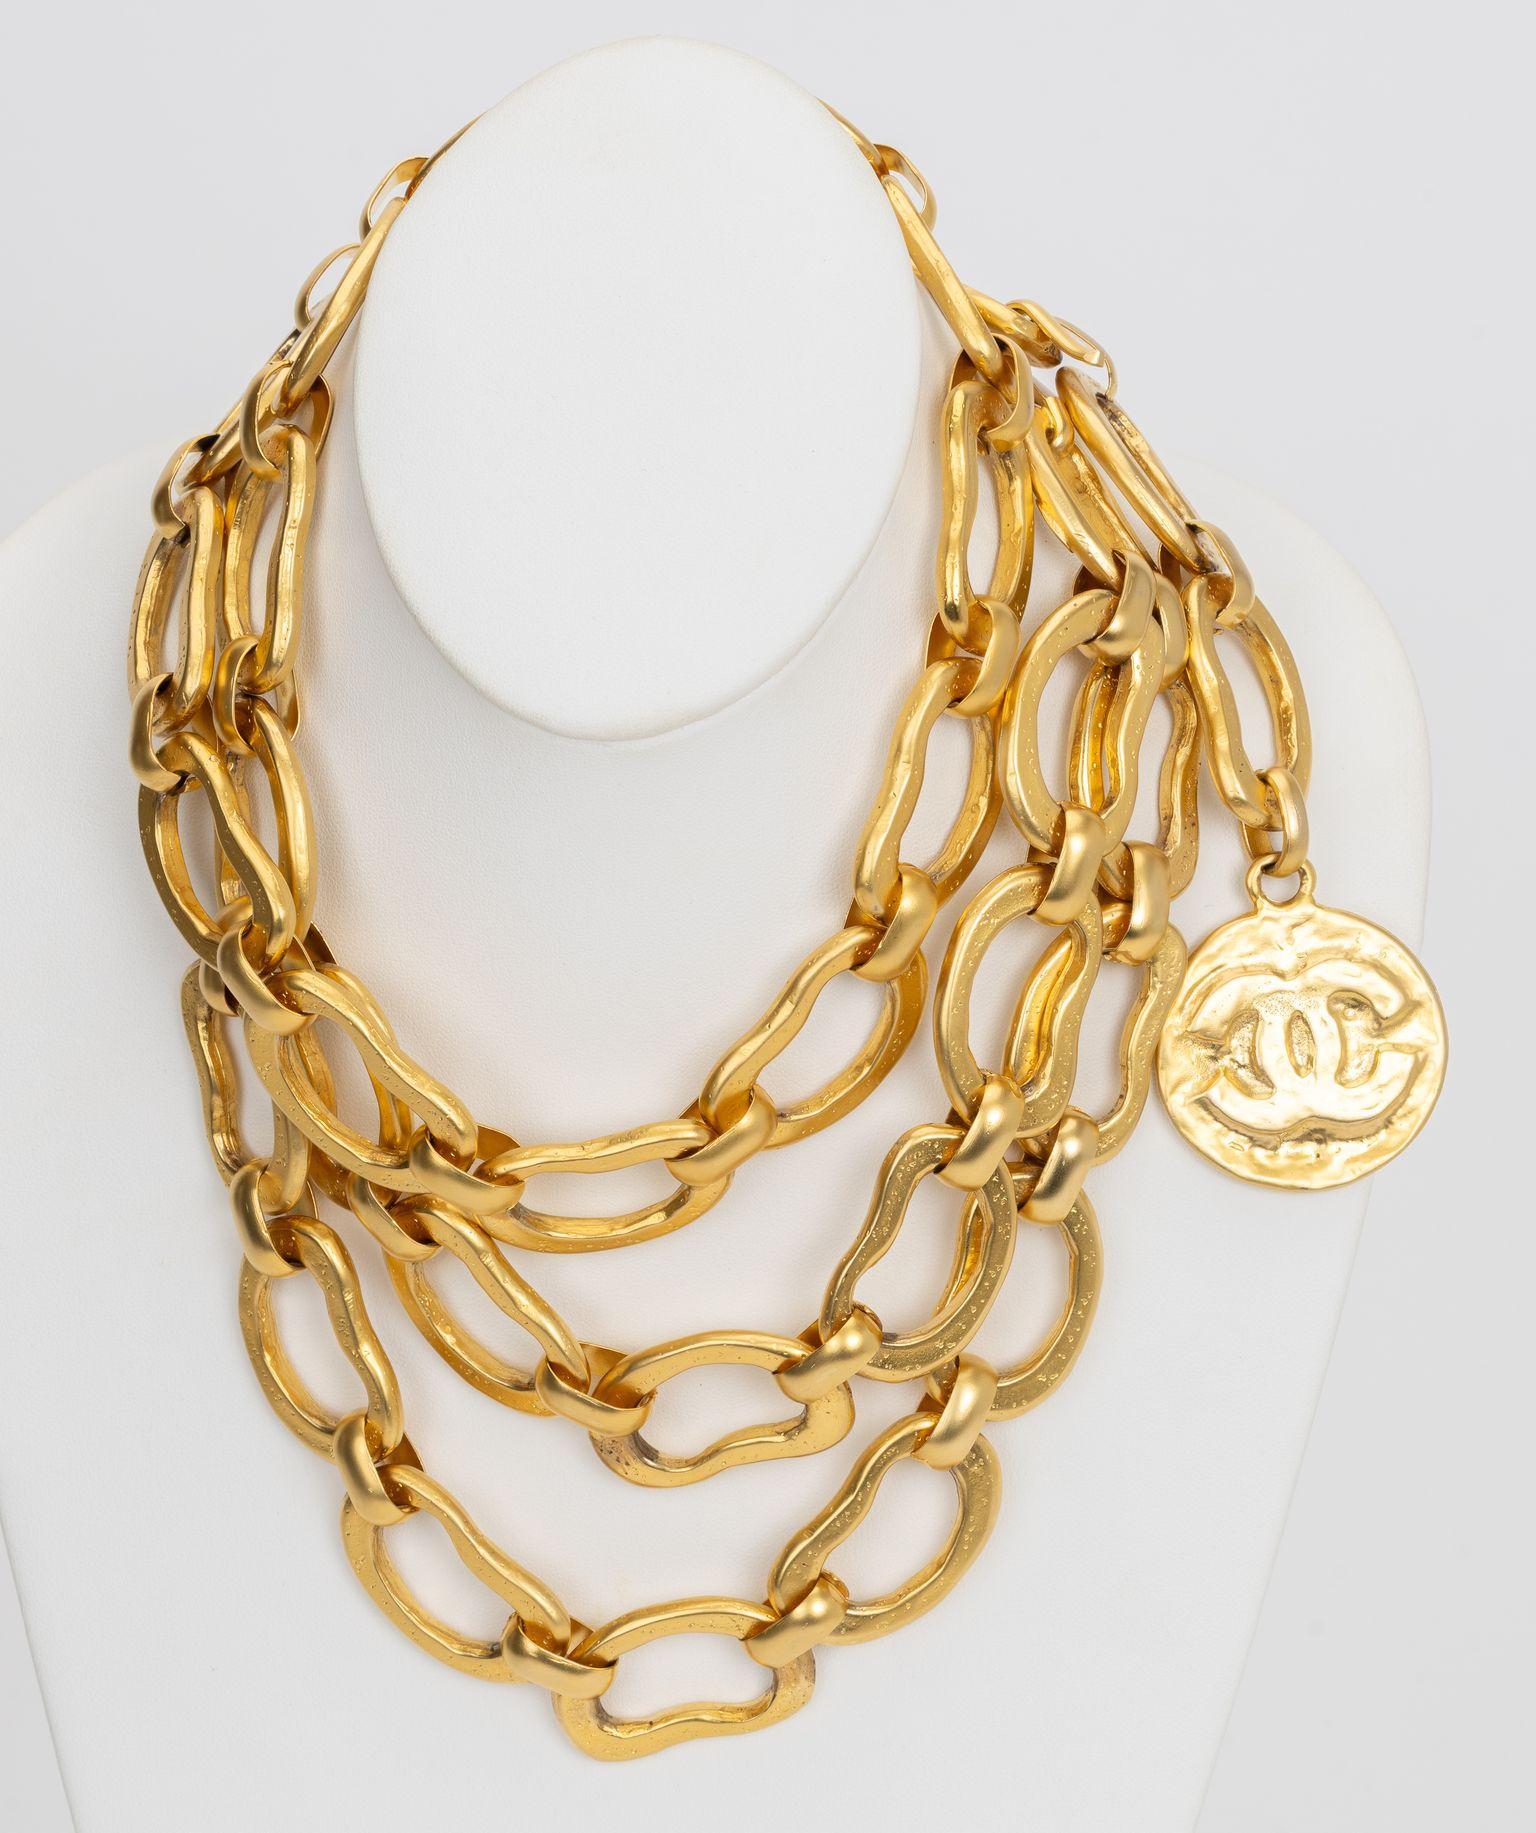 Chanel collectible double strand belt/necklace. Satin gold finish and cc gold coin charm. Can be worn as a necklace long, double or as a belt. Collection autumn 93, comes with original box.